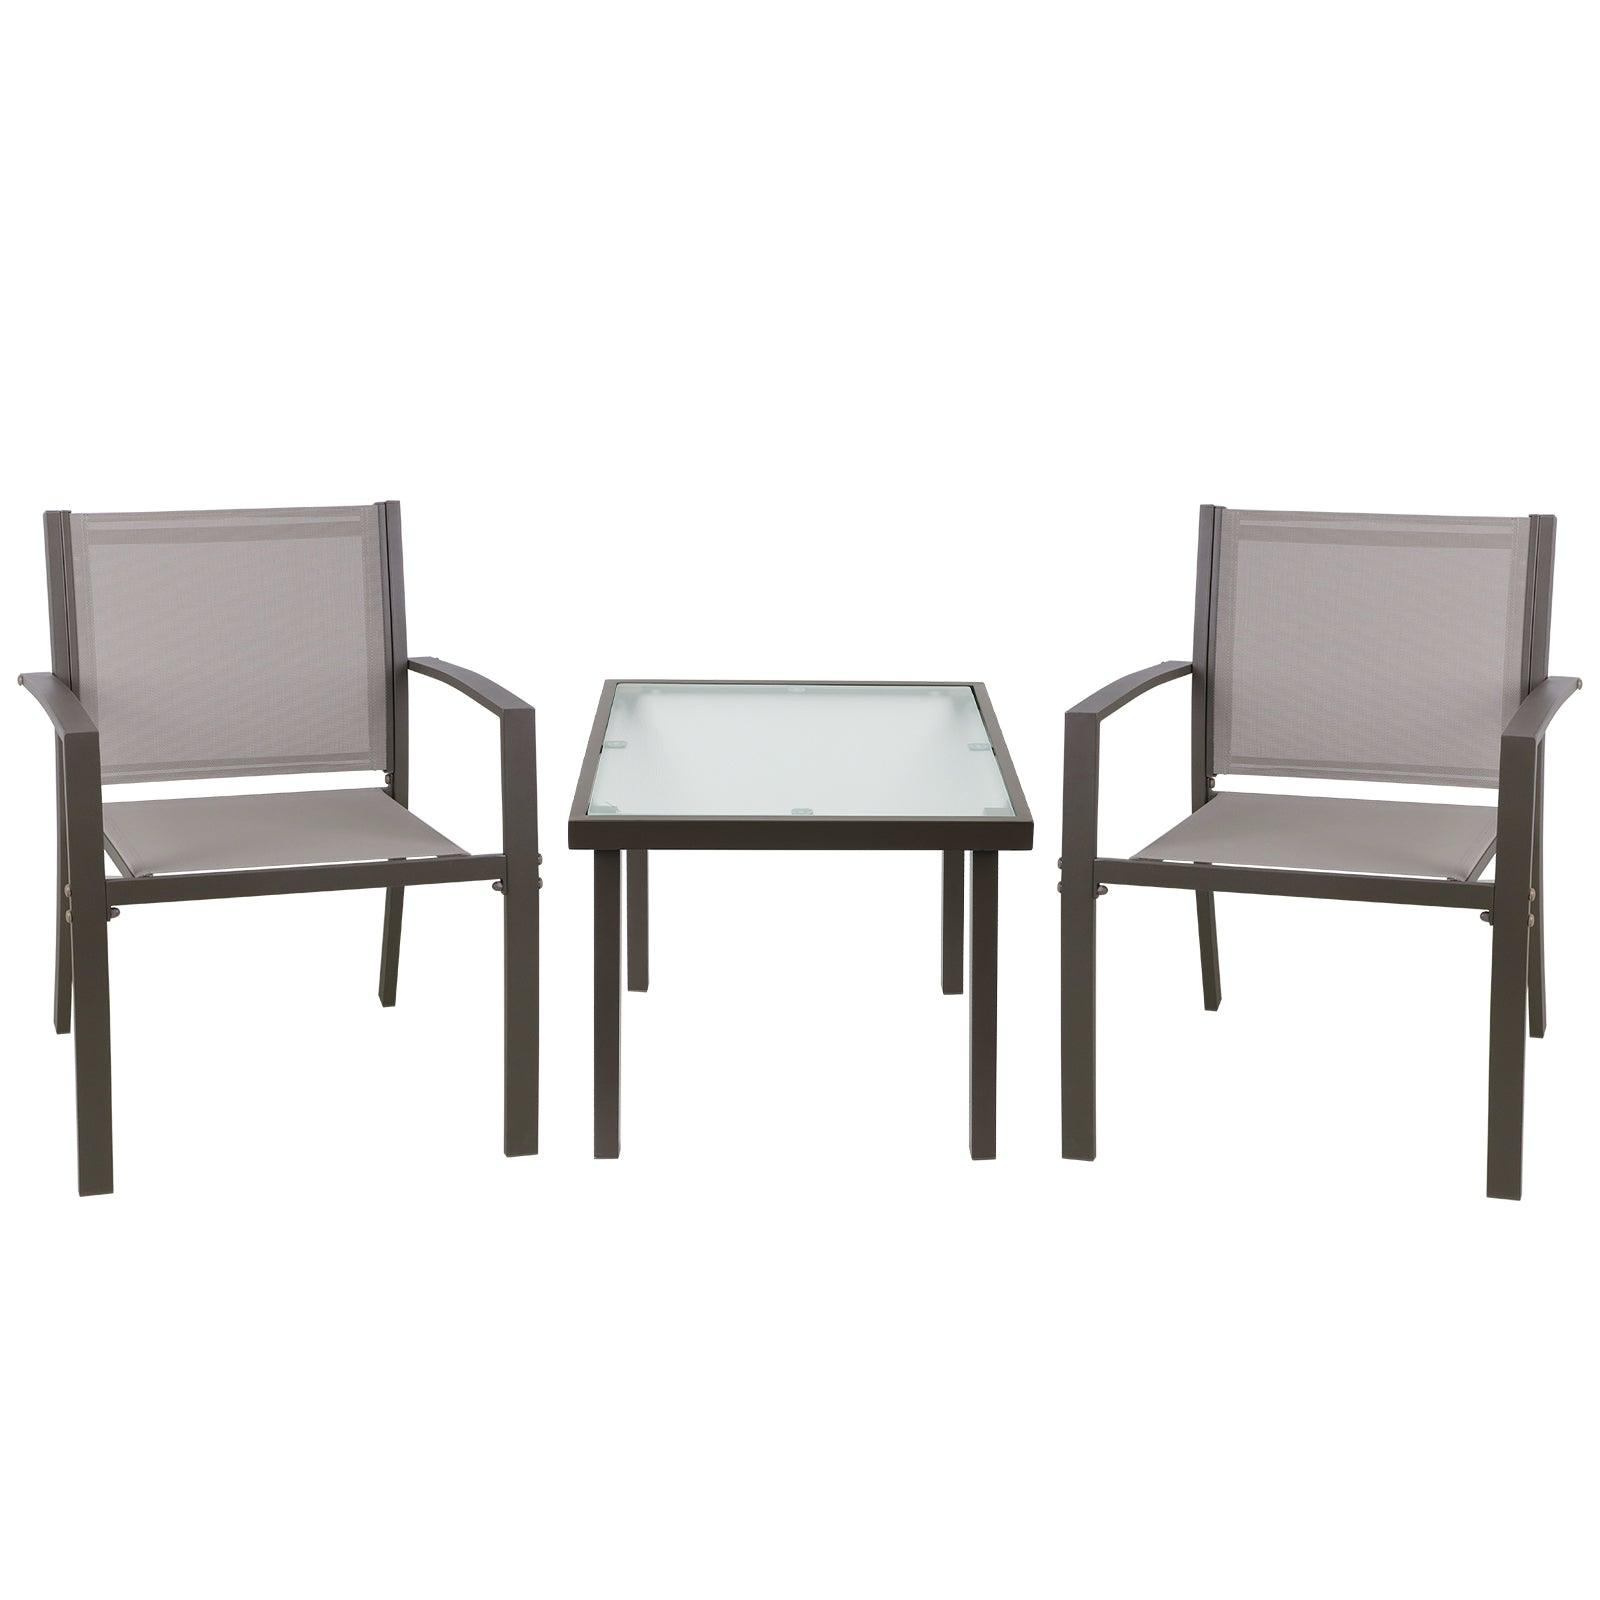 Brown Garden Furniture 3 Piece Set, 2 Armchairs + Glass Coffee Table - Charming Spaces